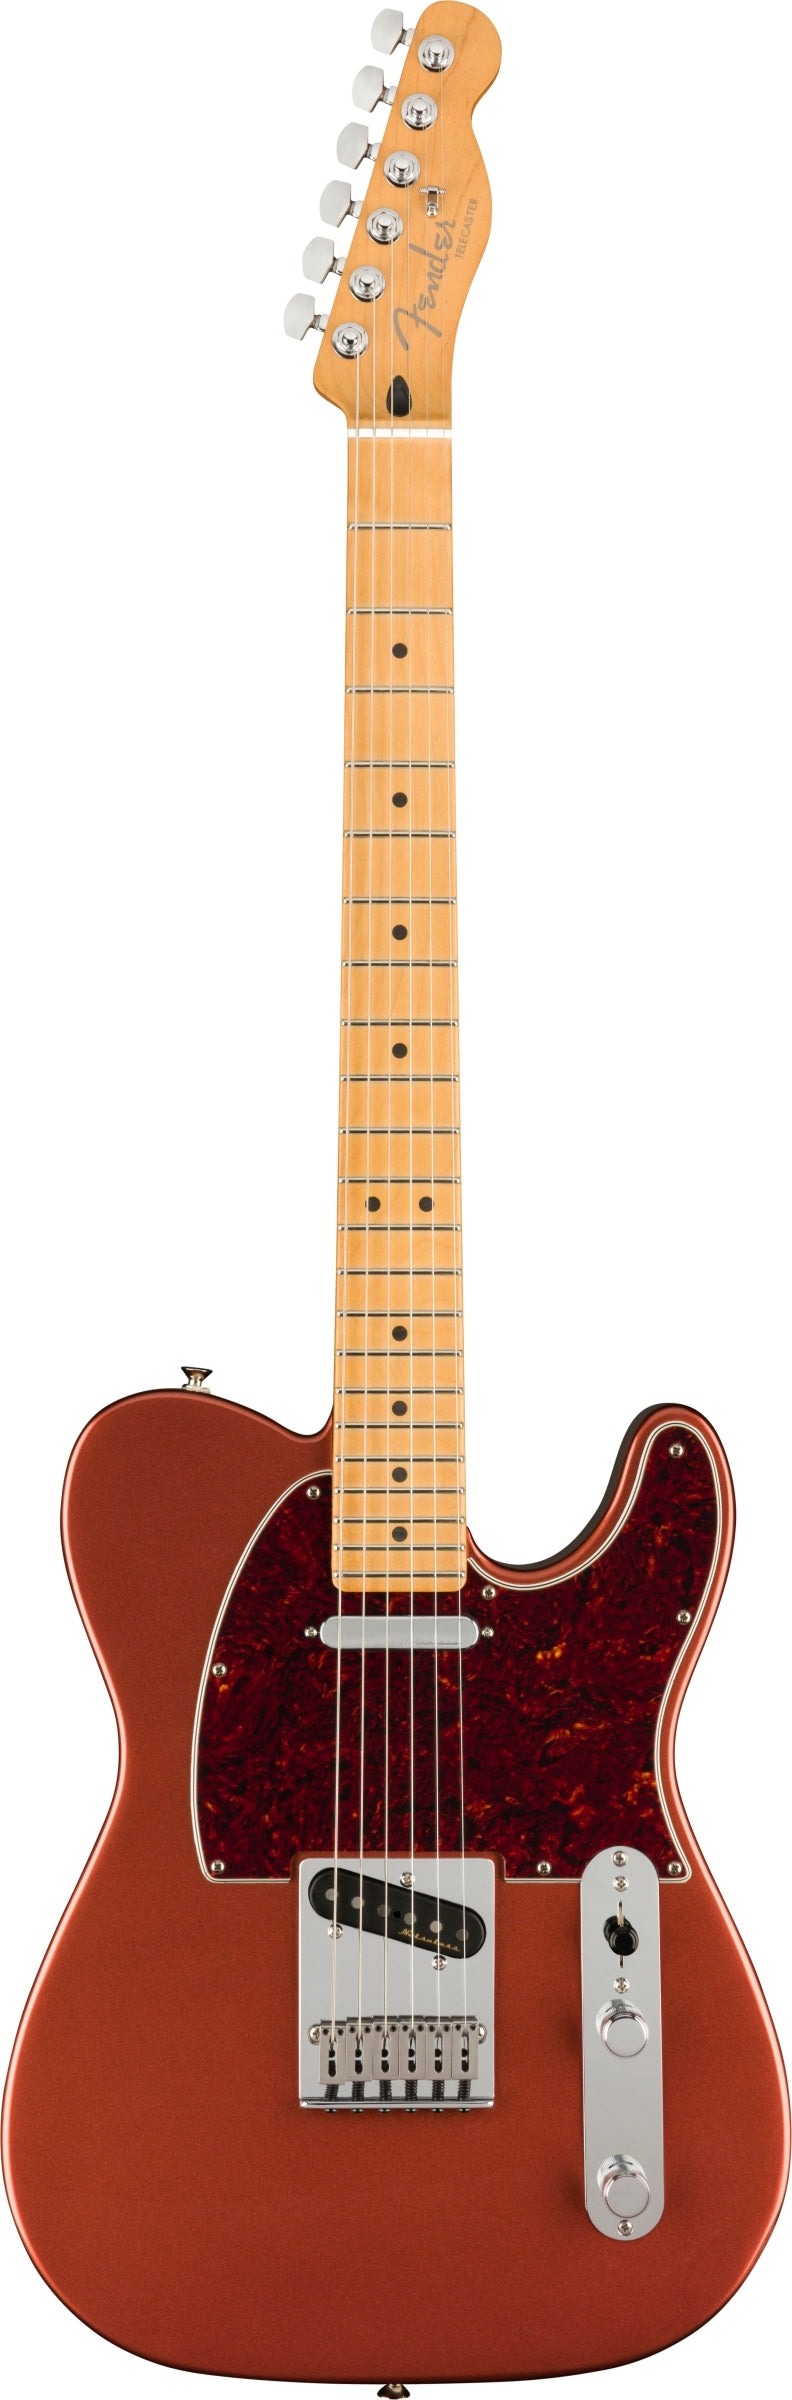 Fender Player Plus Telecaster Electric Guitar - Aged Candy Apple Red